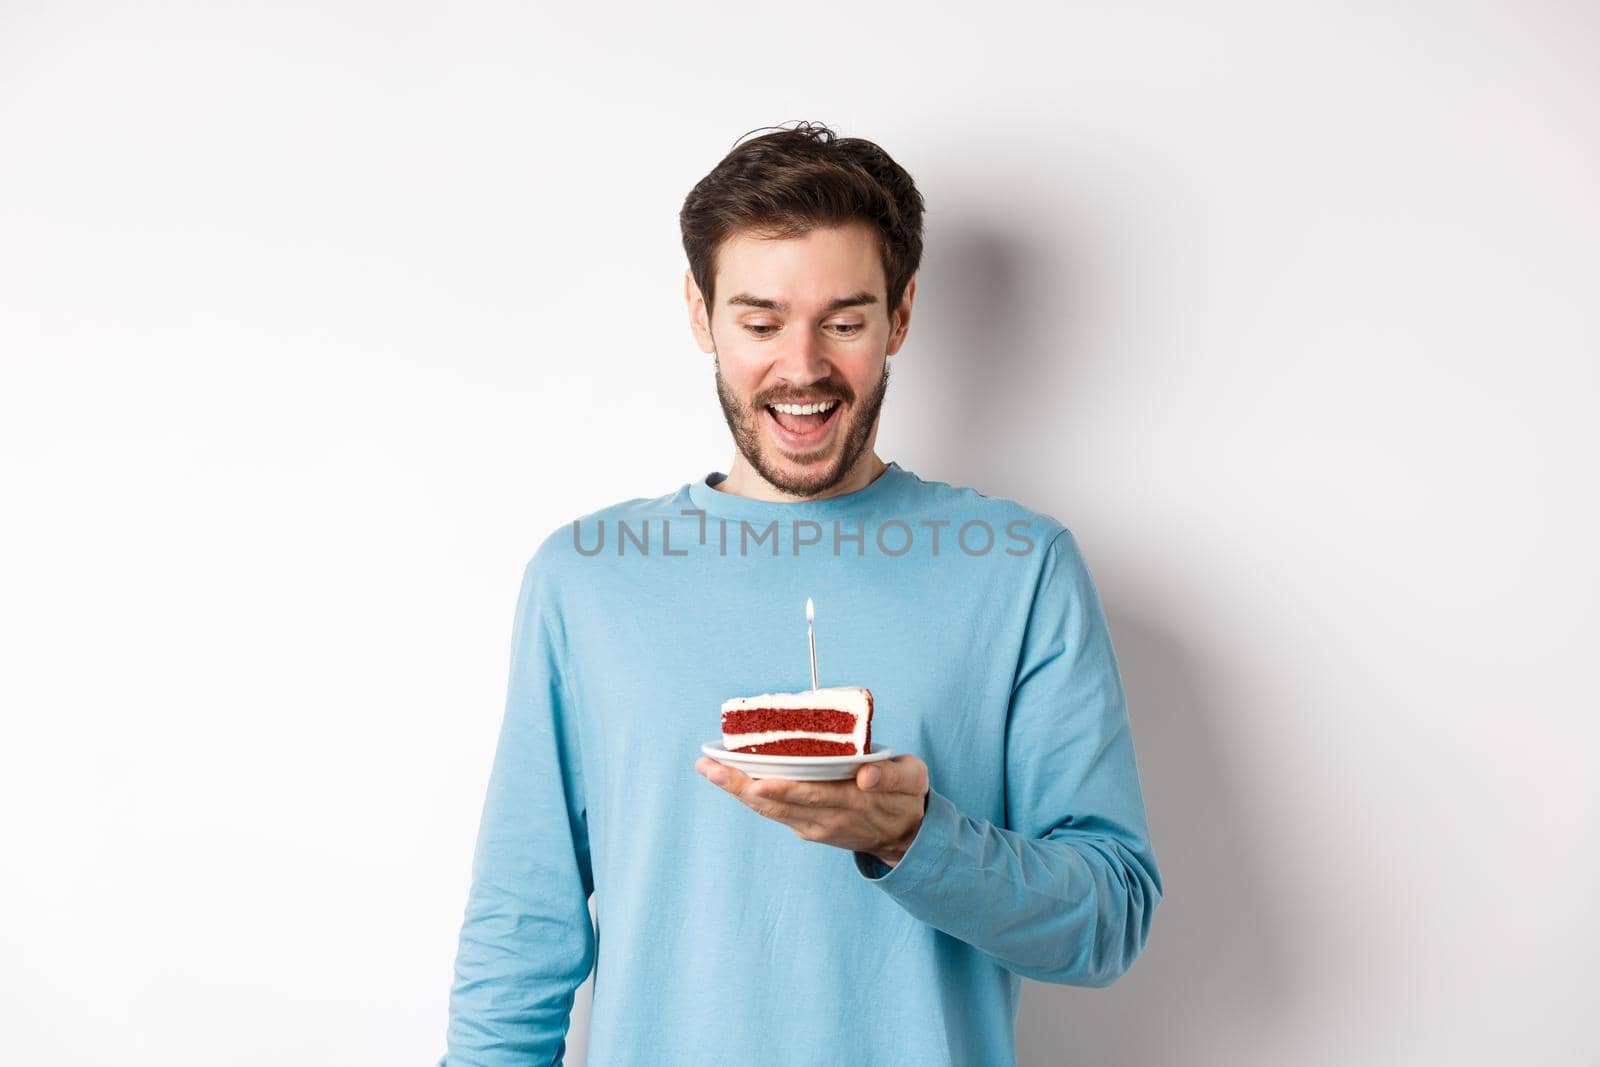 Cheerful man looking happy at birthday cake, celebrating bday, standing over white background.